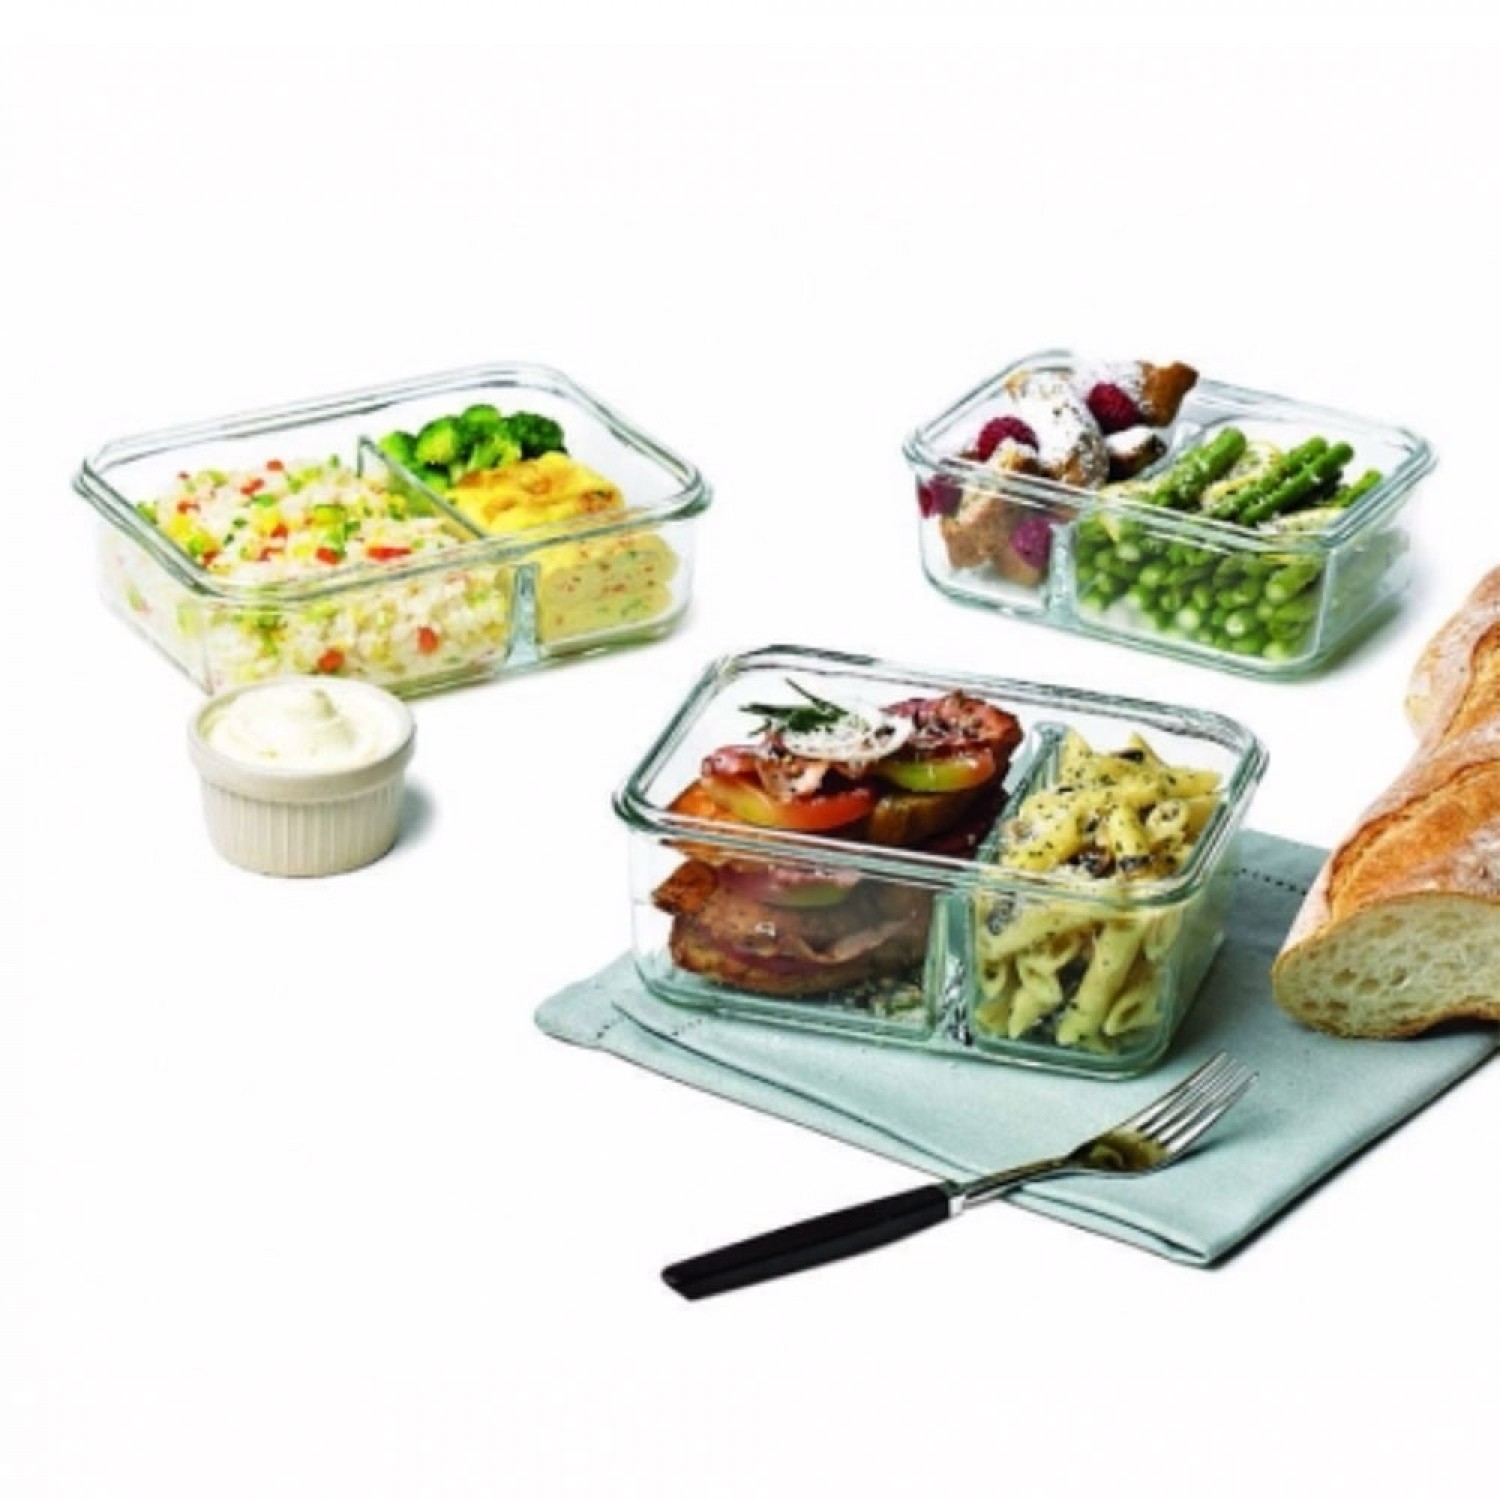 Glasslock microwaveable Food Container DUO Air Type